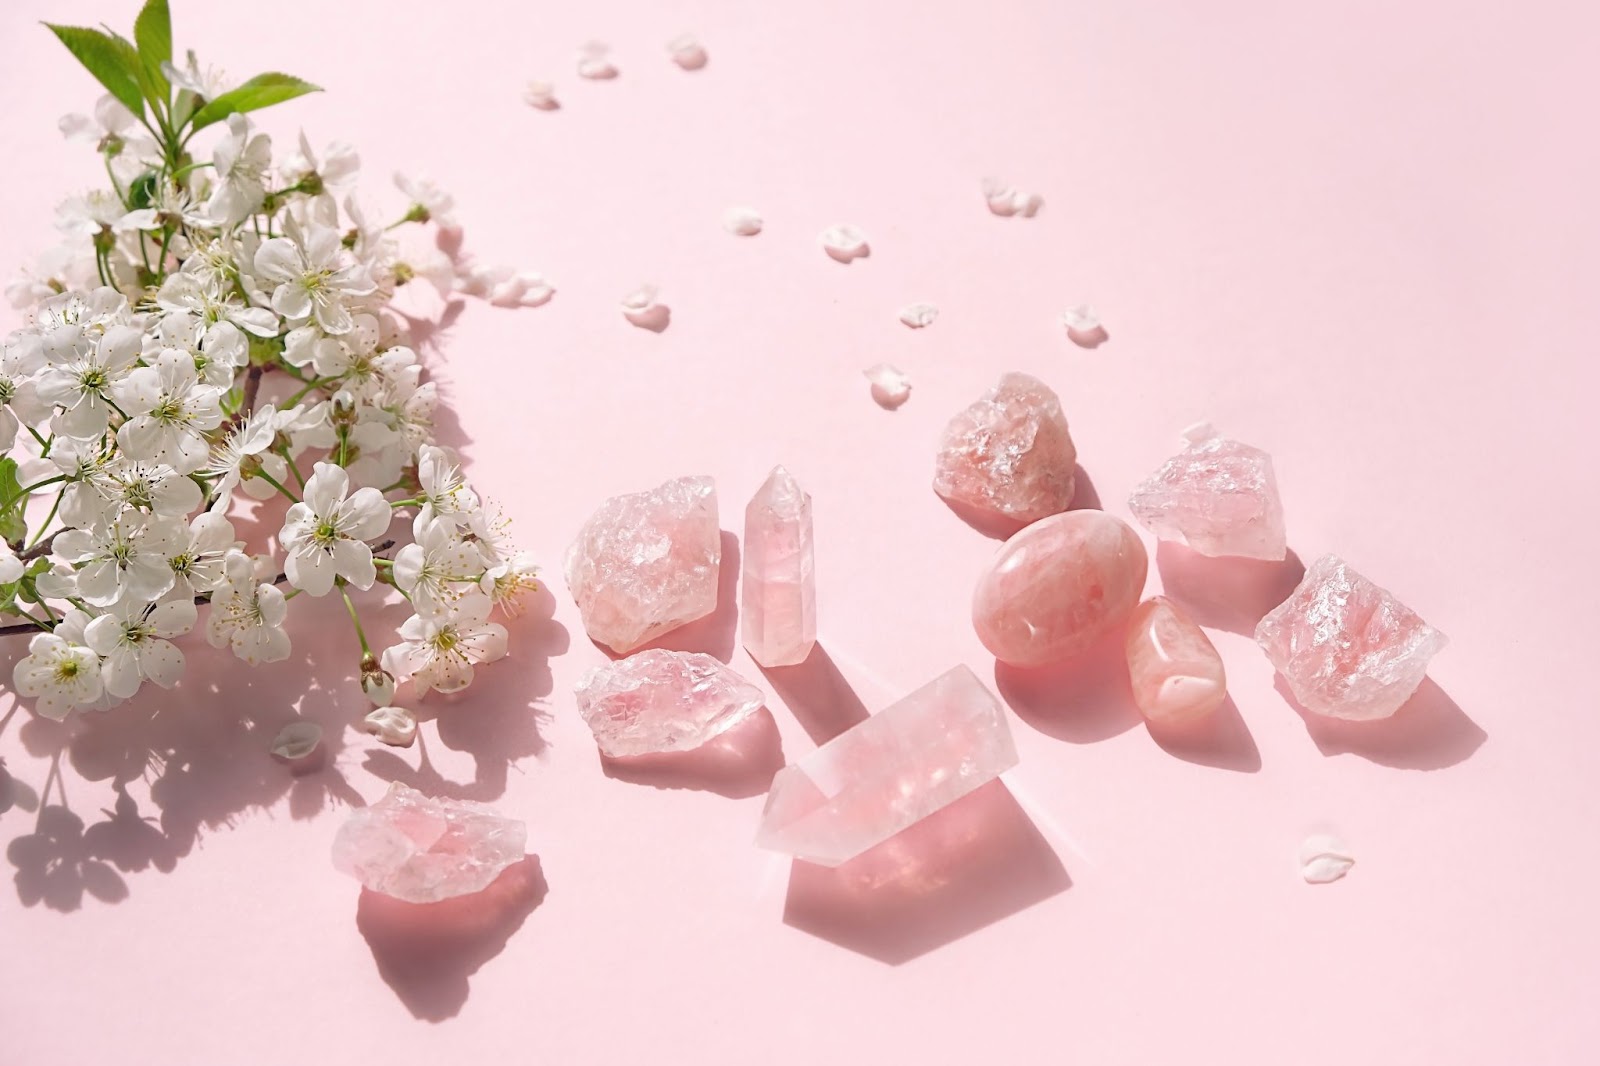 Pink rose quartz crystals next to a bunch of white flowers.